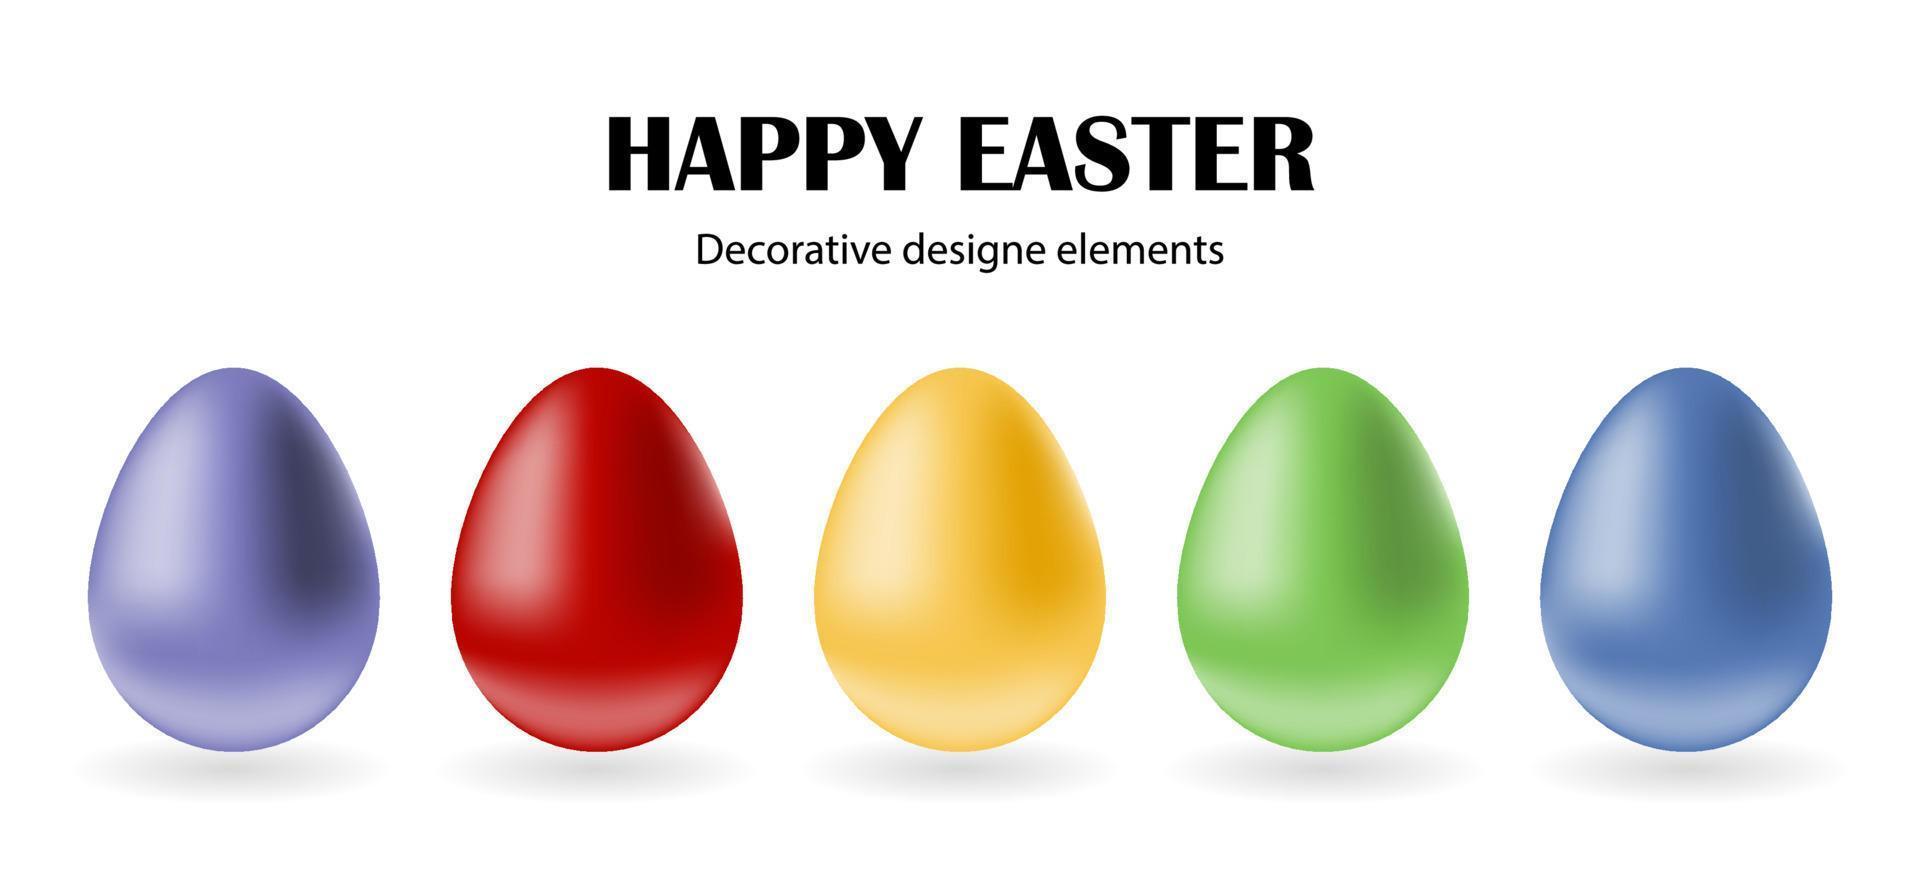 Set of colorful 3d Easter eggs. vector